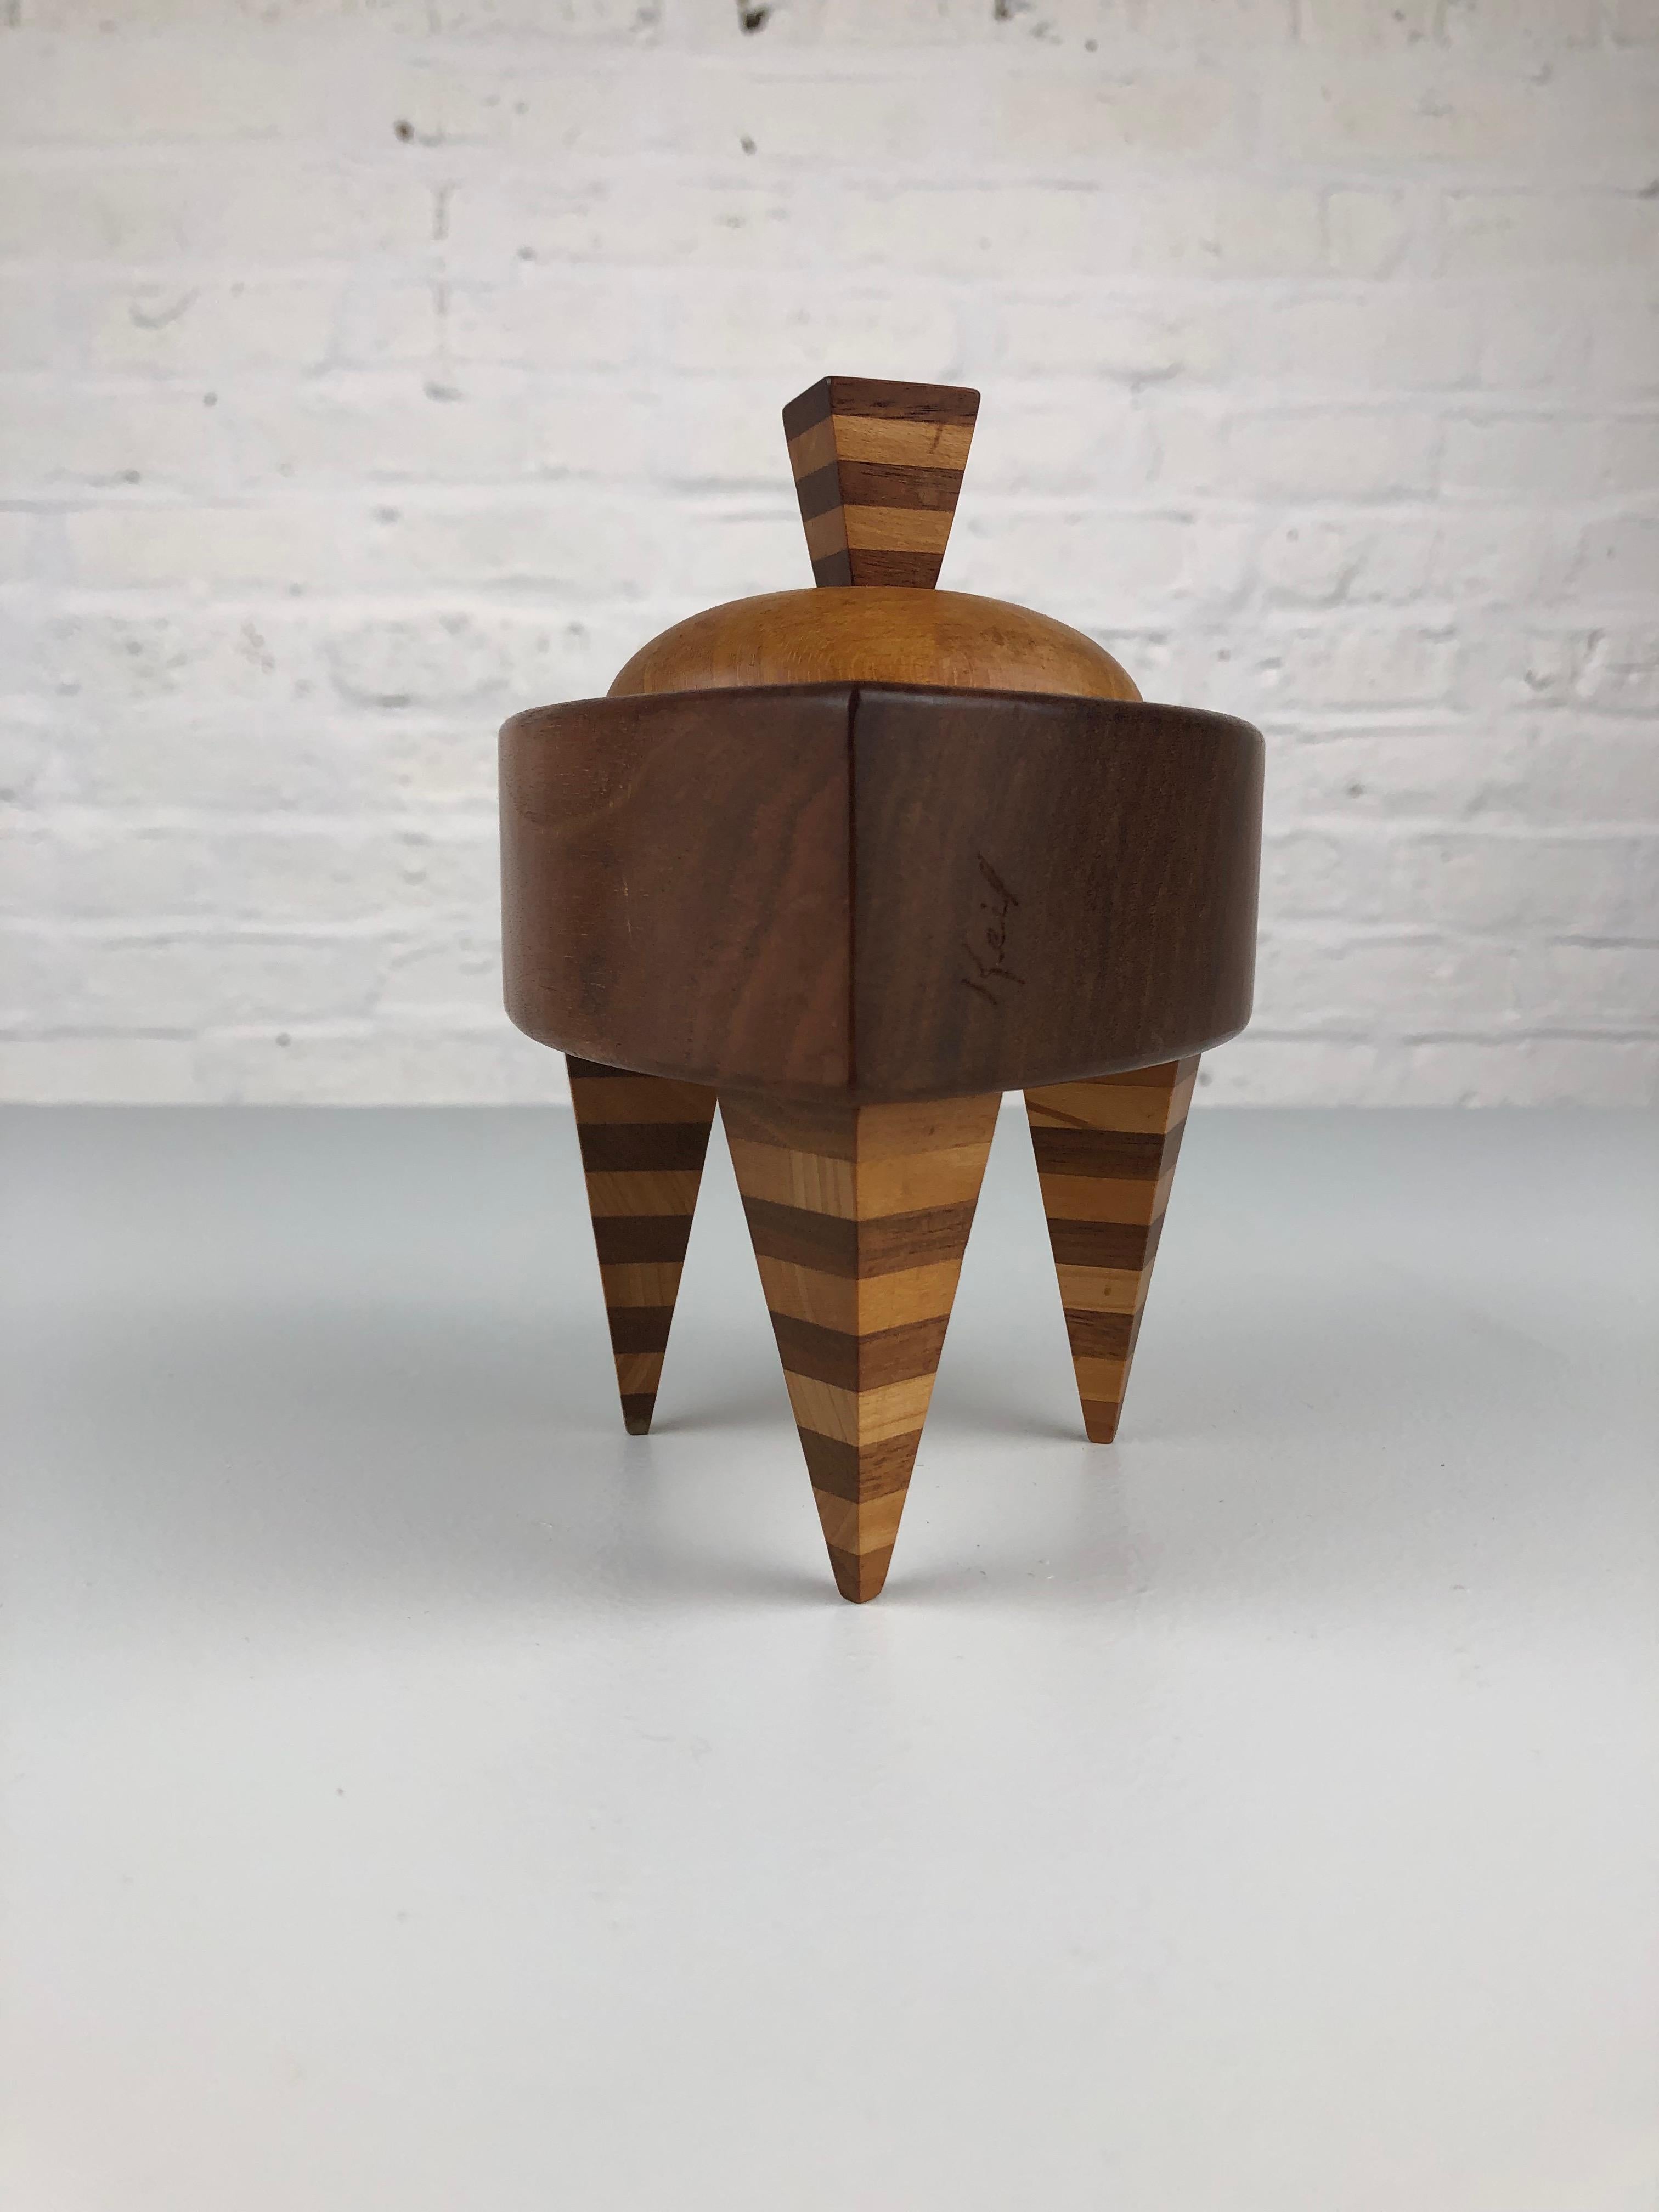 Exquisite handmade trinket box crafted from three distinct woods by a talented American Woodworker in the vibrant 1990s. This piece showcases a masterful play of high contrast stripes and bold, frank perspectives, reminiscent of the iconic work of